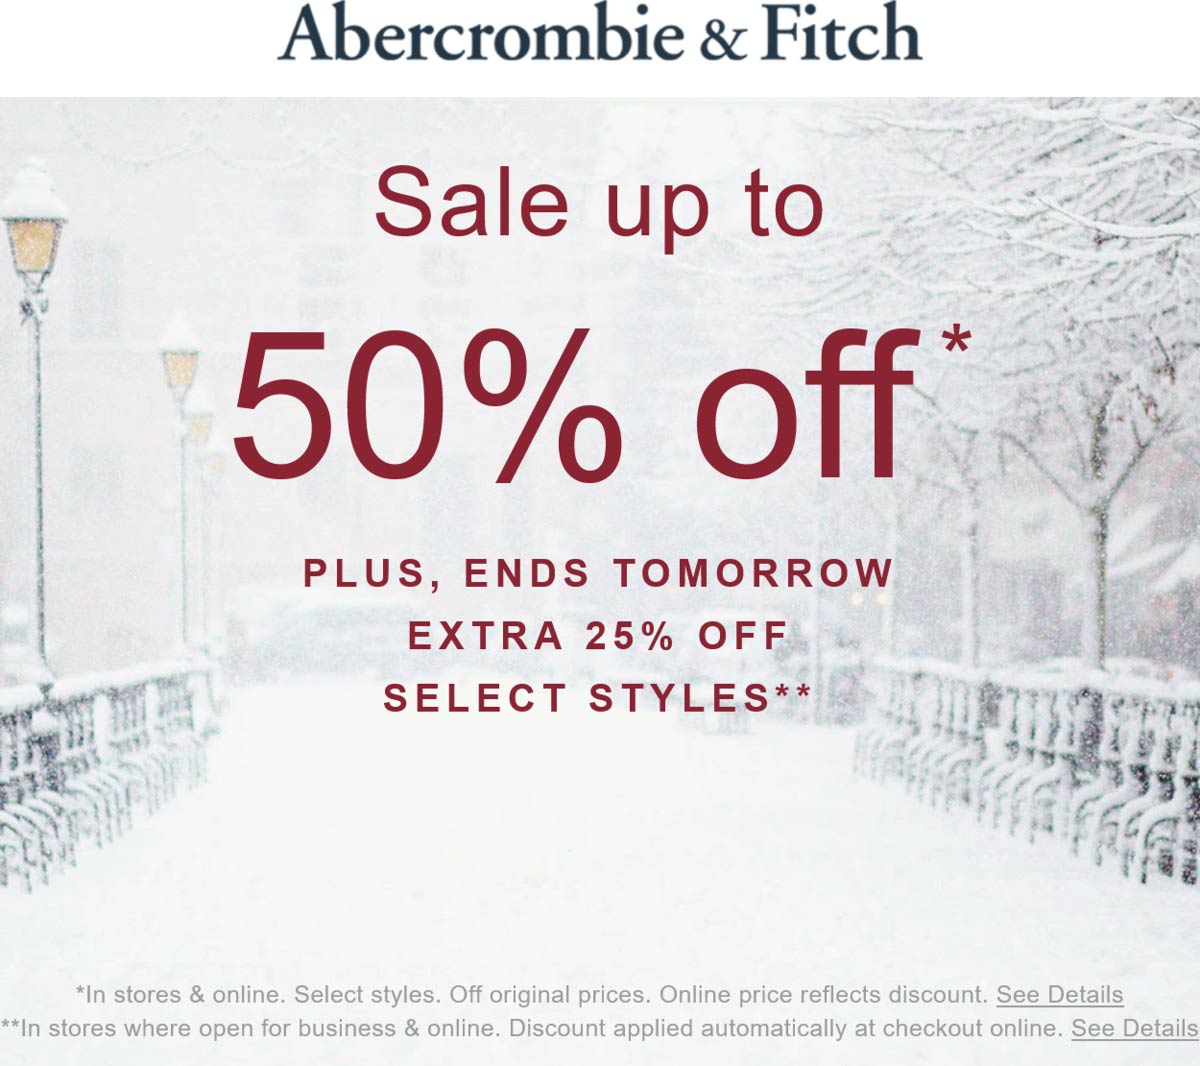 Abercrombie & Fitch stores Coupon  Extra 25% off sale items & more at Abercrombie & Fitch #abercrombiefitch 